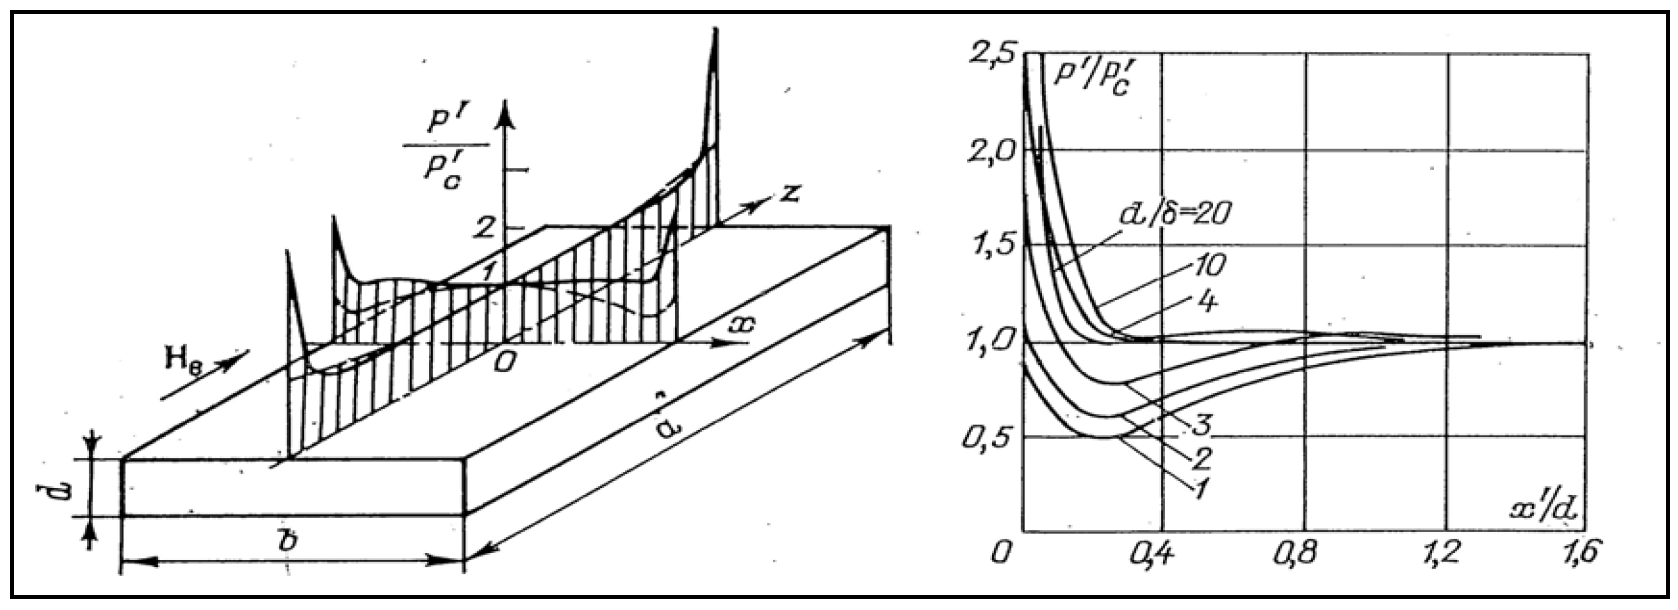 Fluxtrol - Simulation of Induction Heating of Slabs using ELTA 6.0 - Figure 1 - Left: Distribution of power p' in width and length of a slab with dimensions d×b×a. Power is normalized to its value at the central point 0. Right: Distribution of normalized power density near the edge of wide slab for different ratios of d/δ